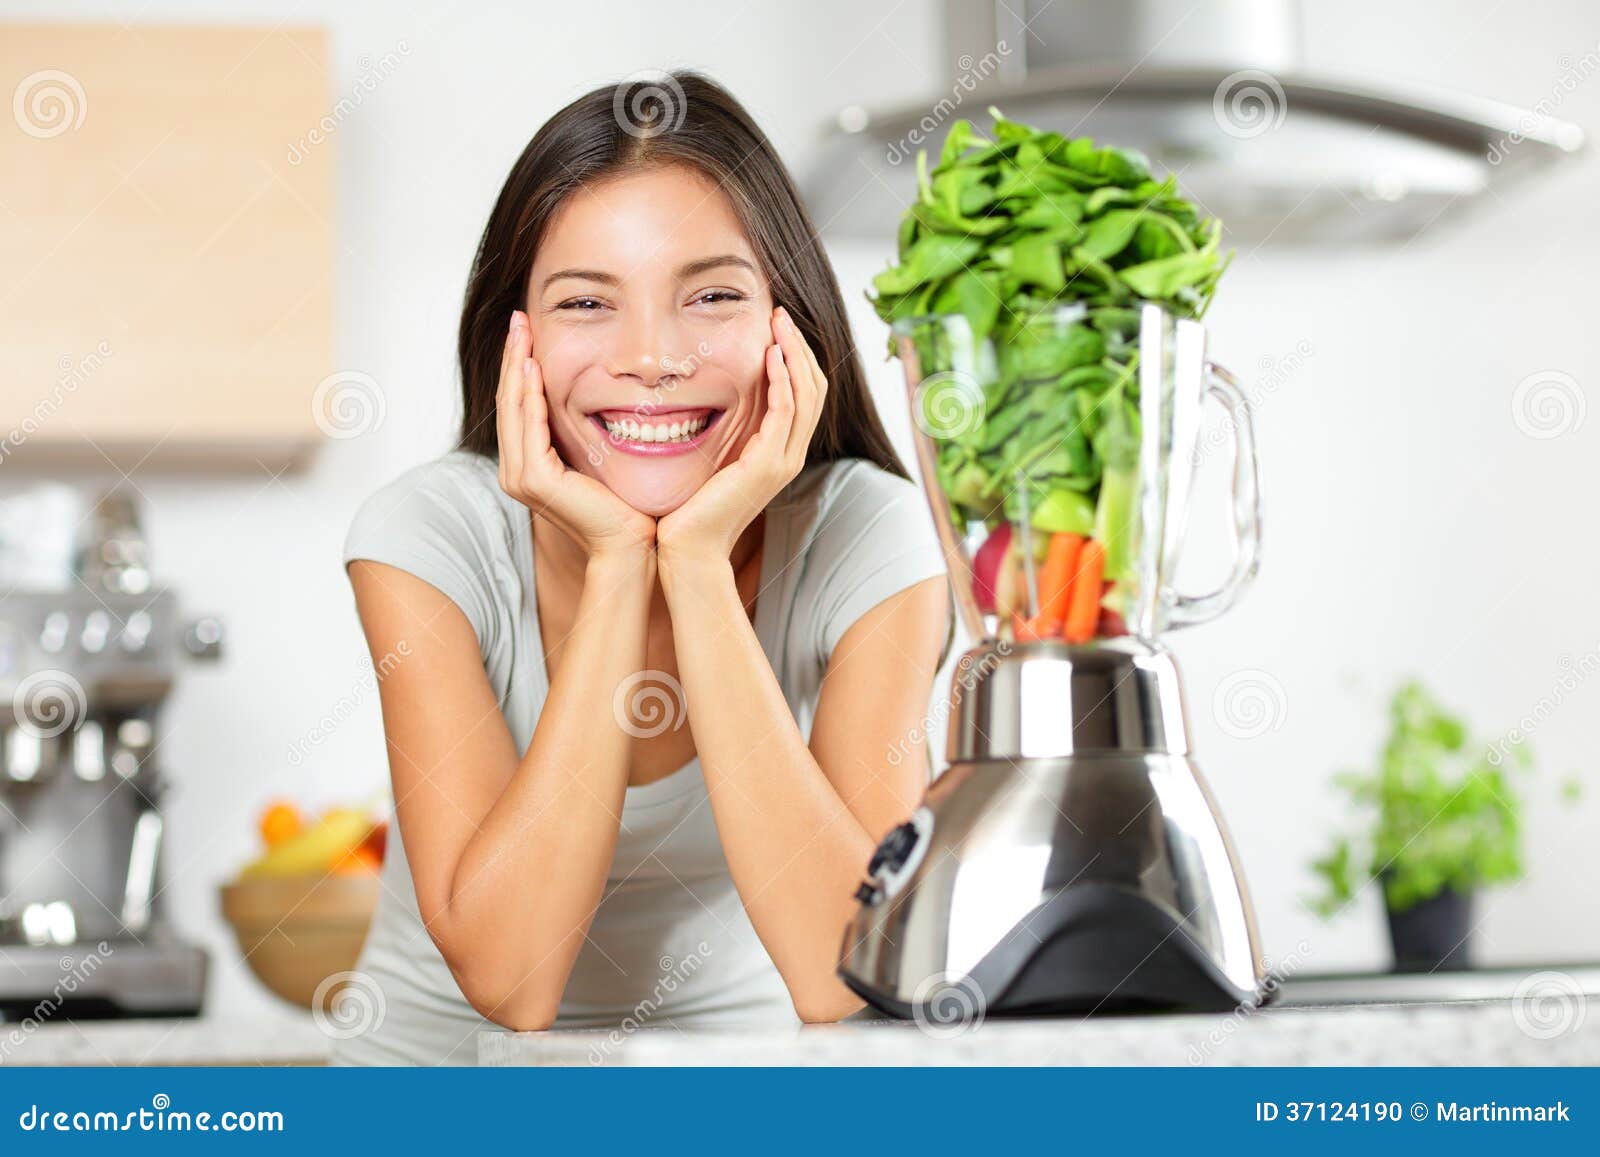 https://thumbs.dreamstime.com/z/green-smoothie-woman-making-vegetable-smoothies-blender-healthy-eating-lifestyle-concept-portrait-beautiful-young-37124190.jpg